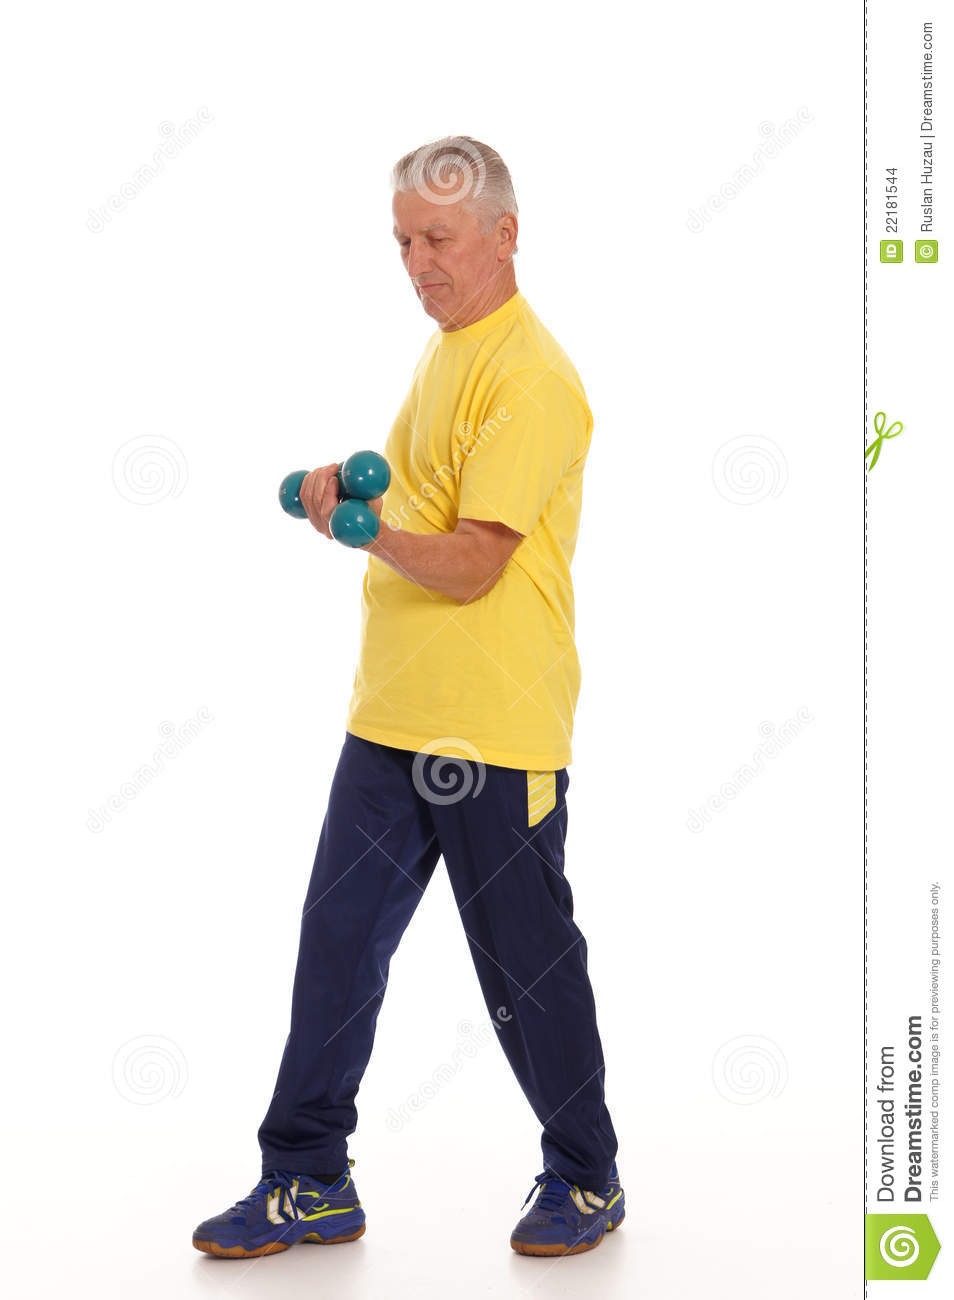 Old Man With Dumb Bells On White Stock Images   Image  22181544